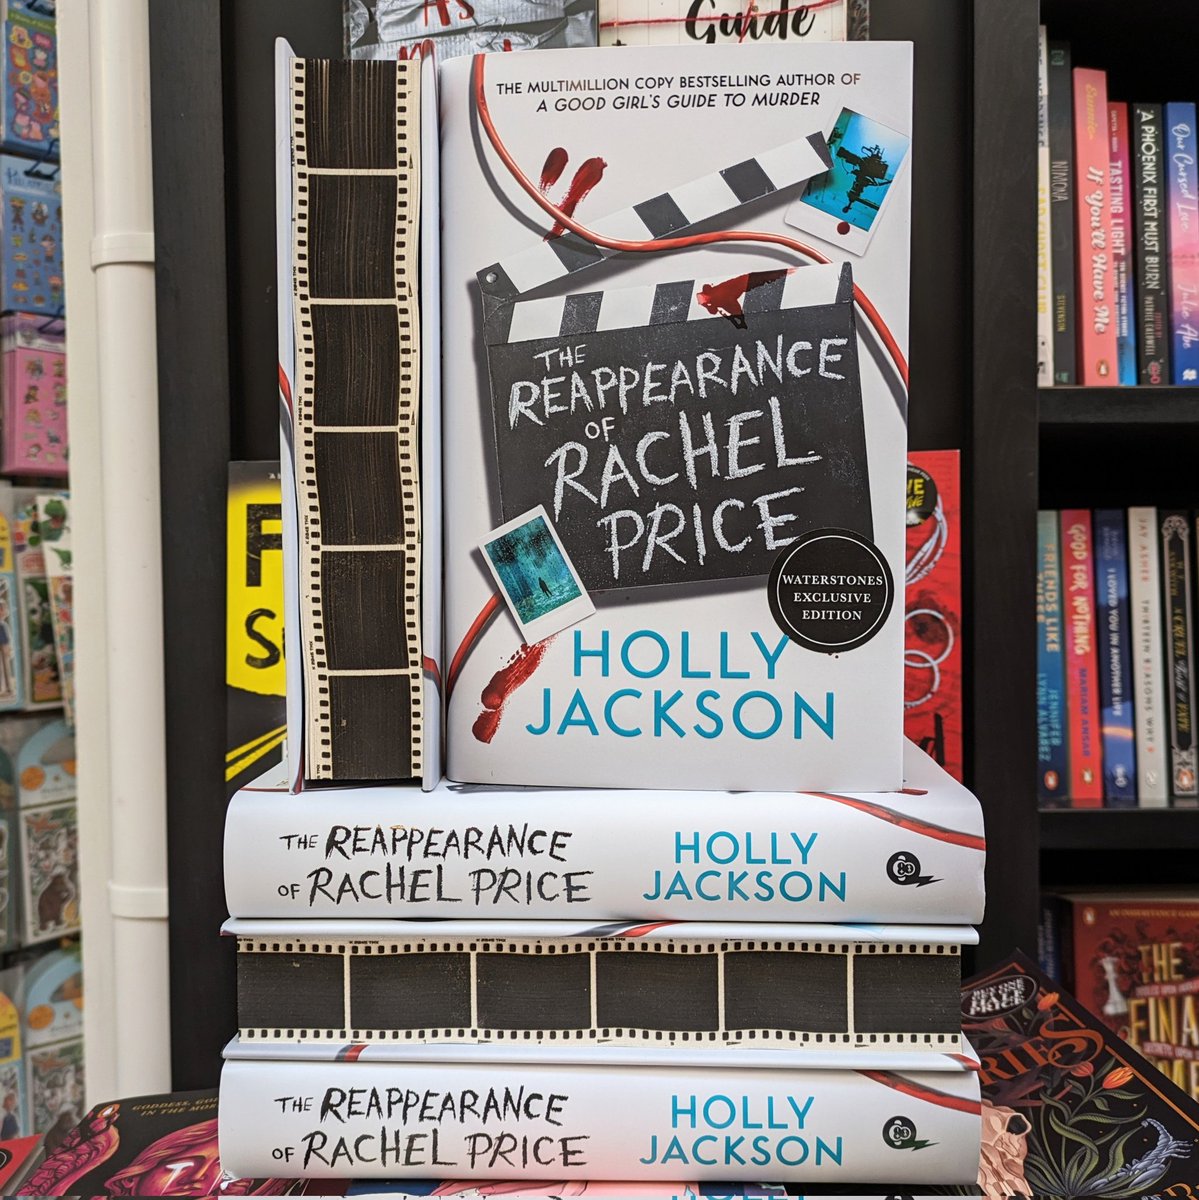 It's here!!! The latest unputdownable thriller from the author of 'A Good Girl's Guide To Murder' is published today, and we've got signed exclusive editions currently available while stock lasts! #waterstones #thereappearanceofrachelprice #hollyjackson